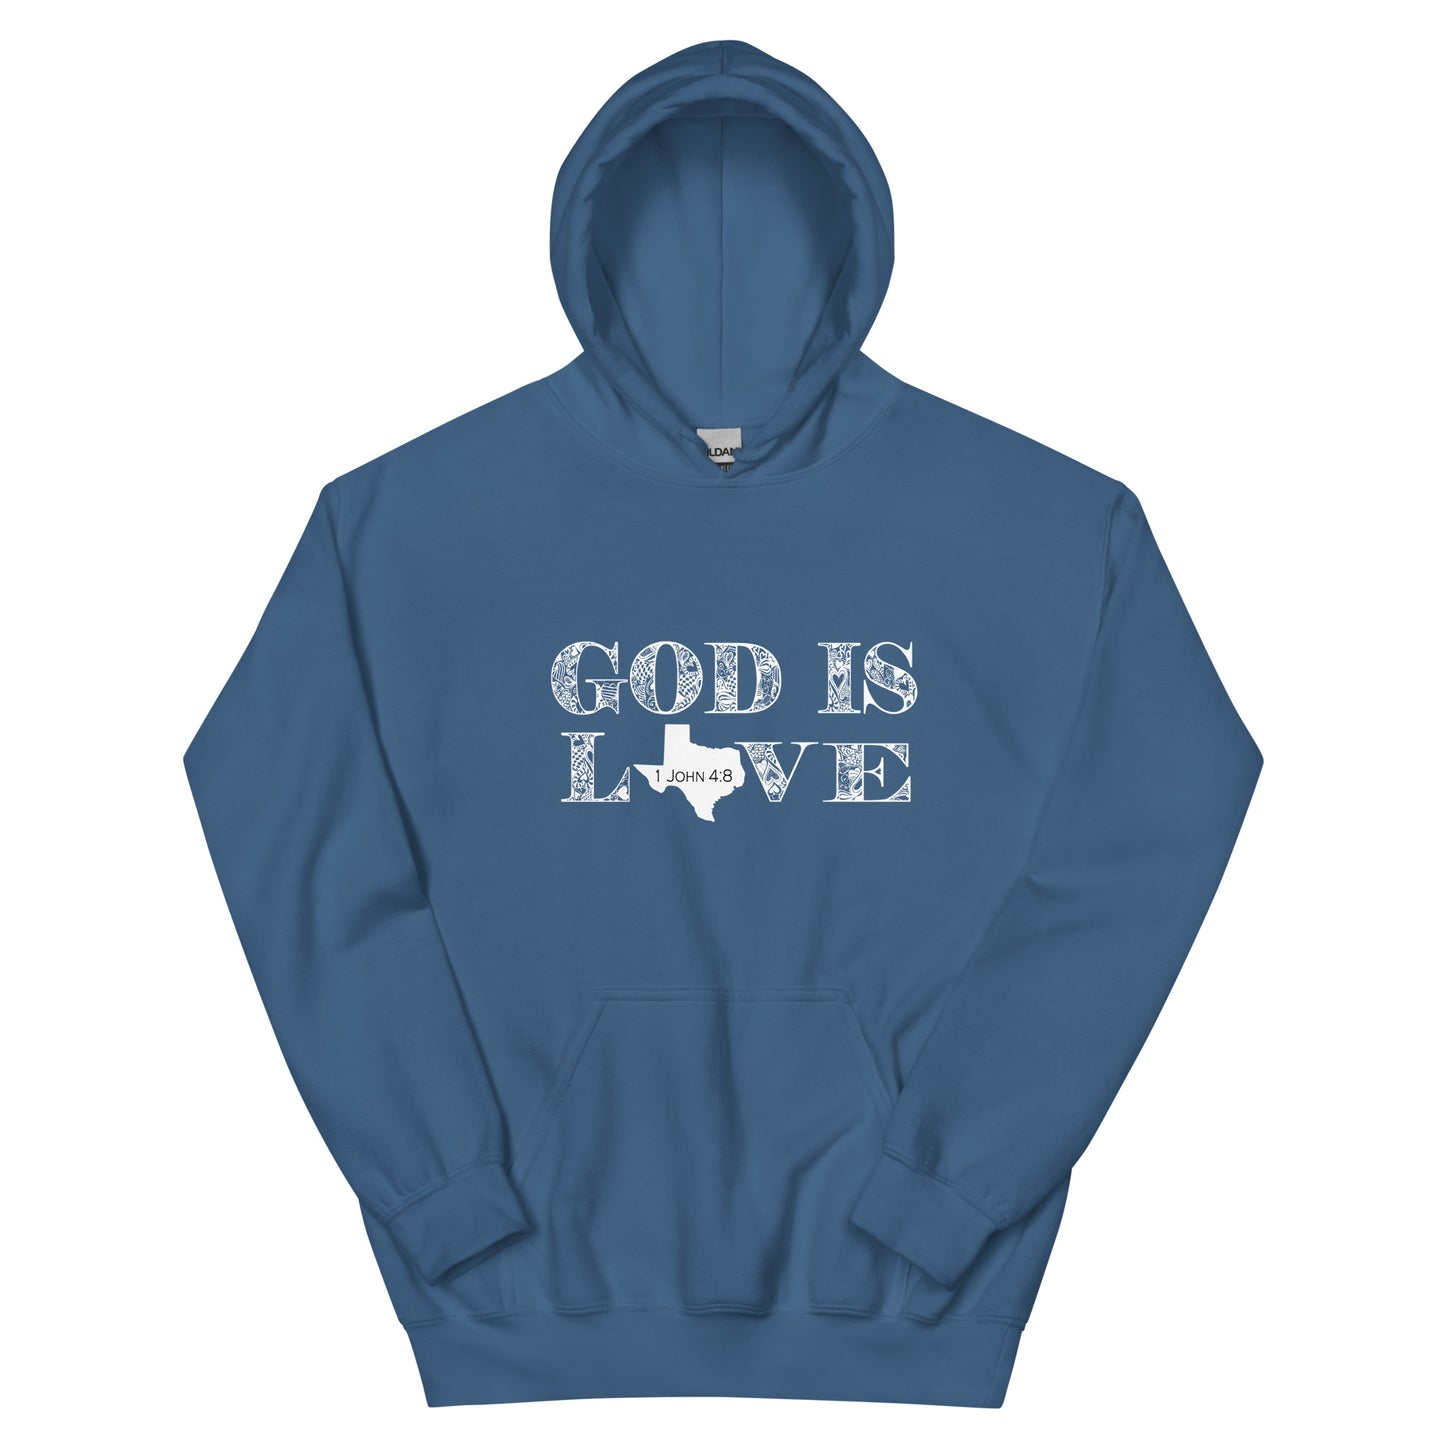 1 John 4:8 God Is Love Unisex Texas Hoodie in Indigo Blue - front view with hood up